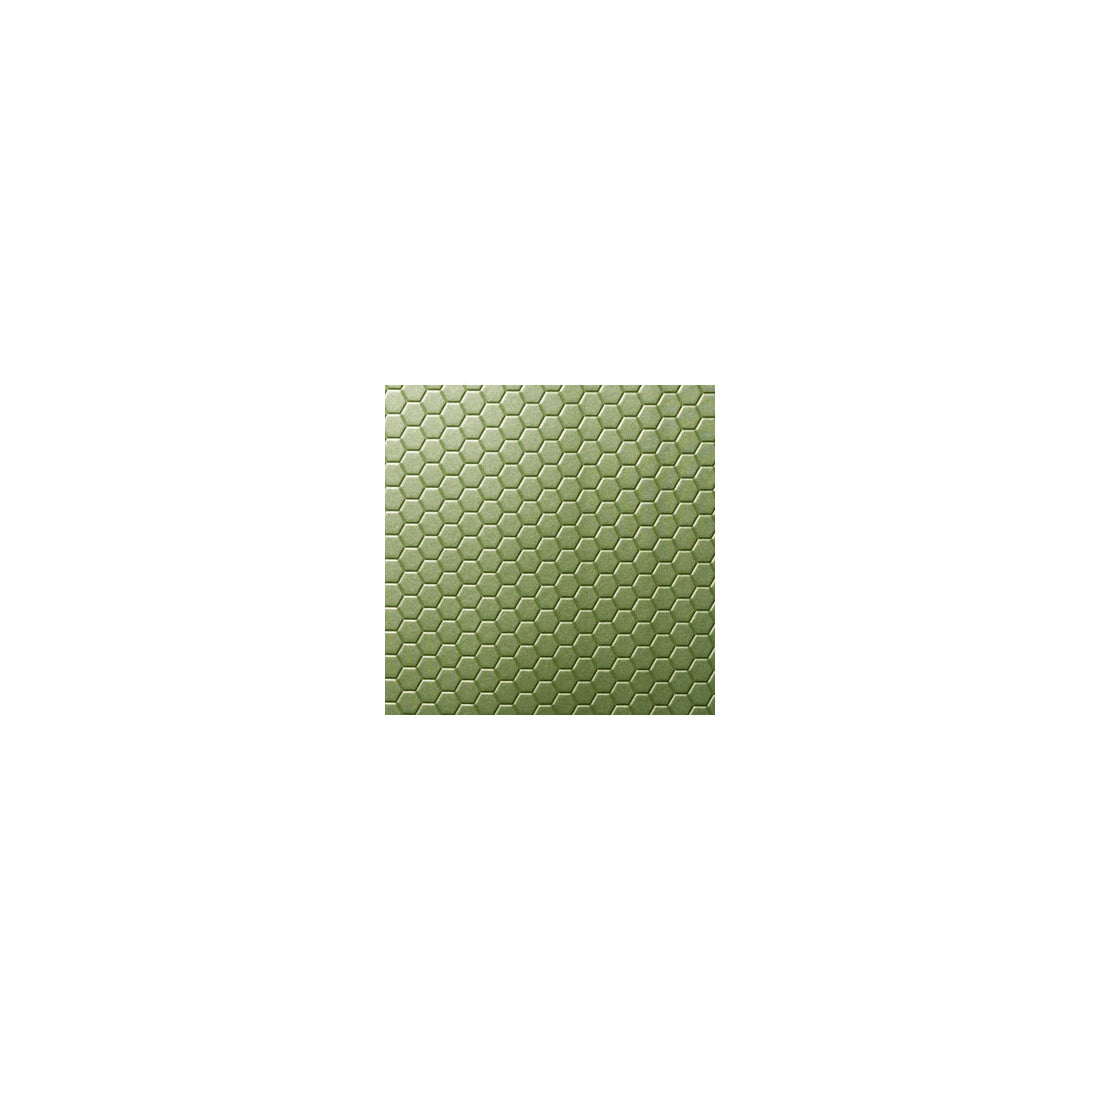 Deja Vu fabric in limelight color - pattern DEJA VU.23.0 - by Kravet Contract in the Sta-Kleen collection